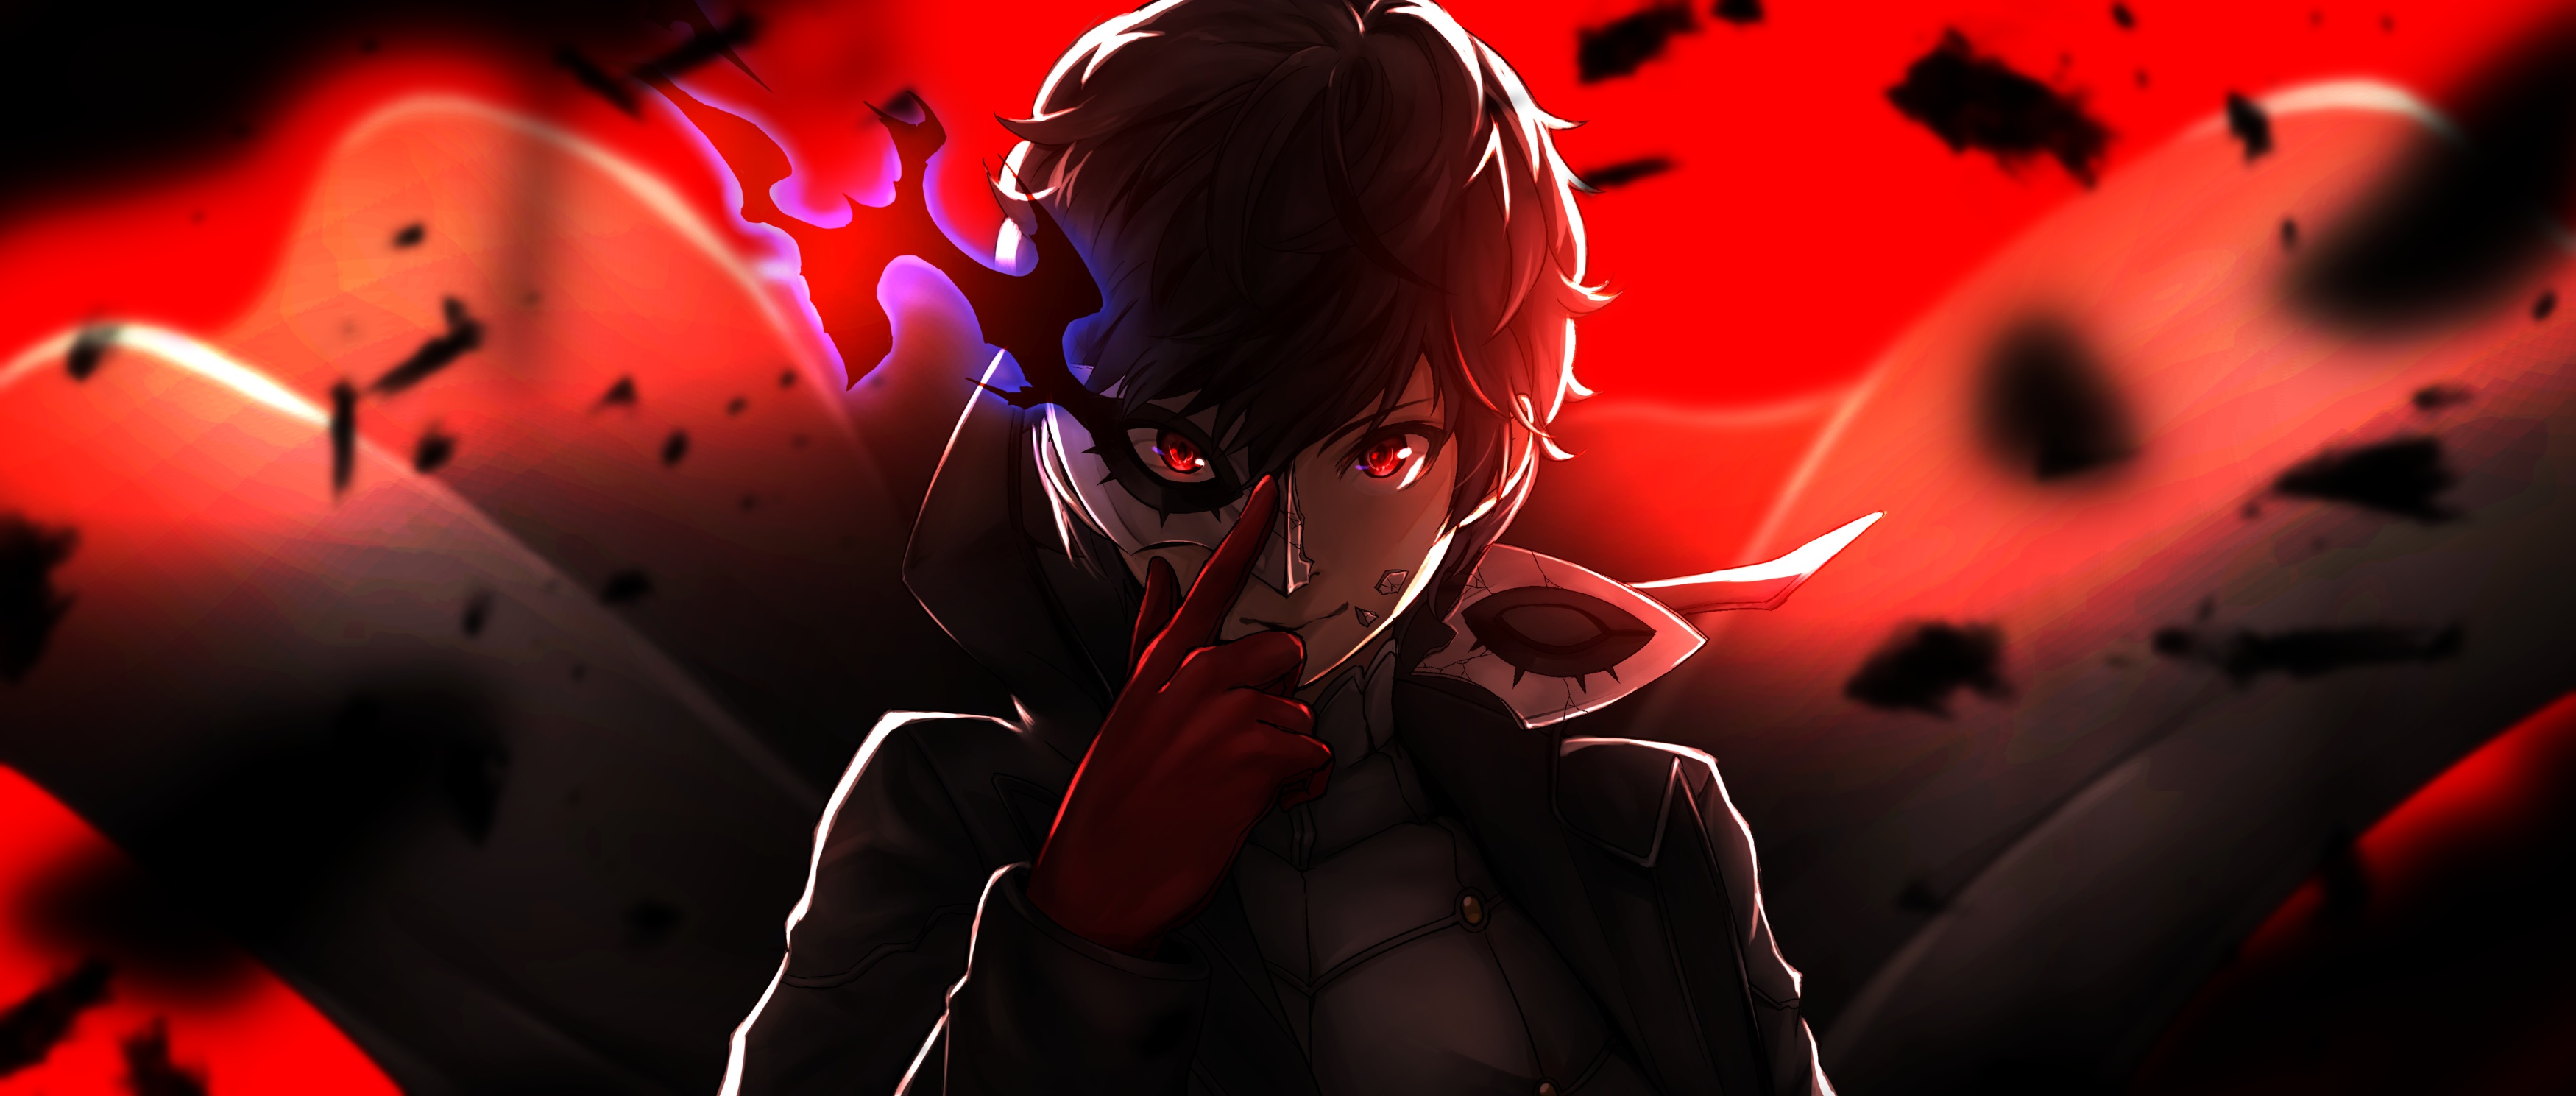 Anime 3500x1489 Persona 5 Protagonist (Persona 5) video games video game art Persona series